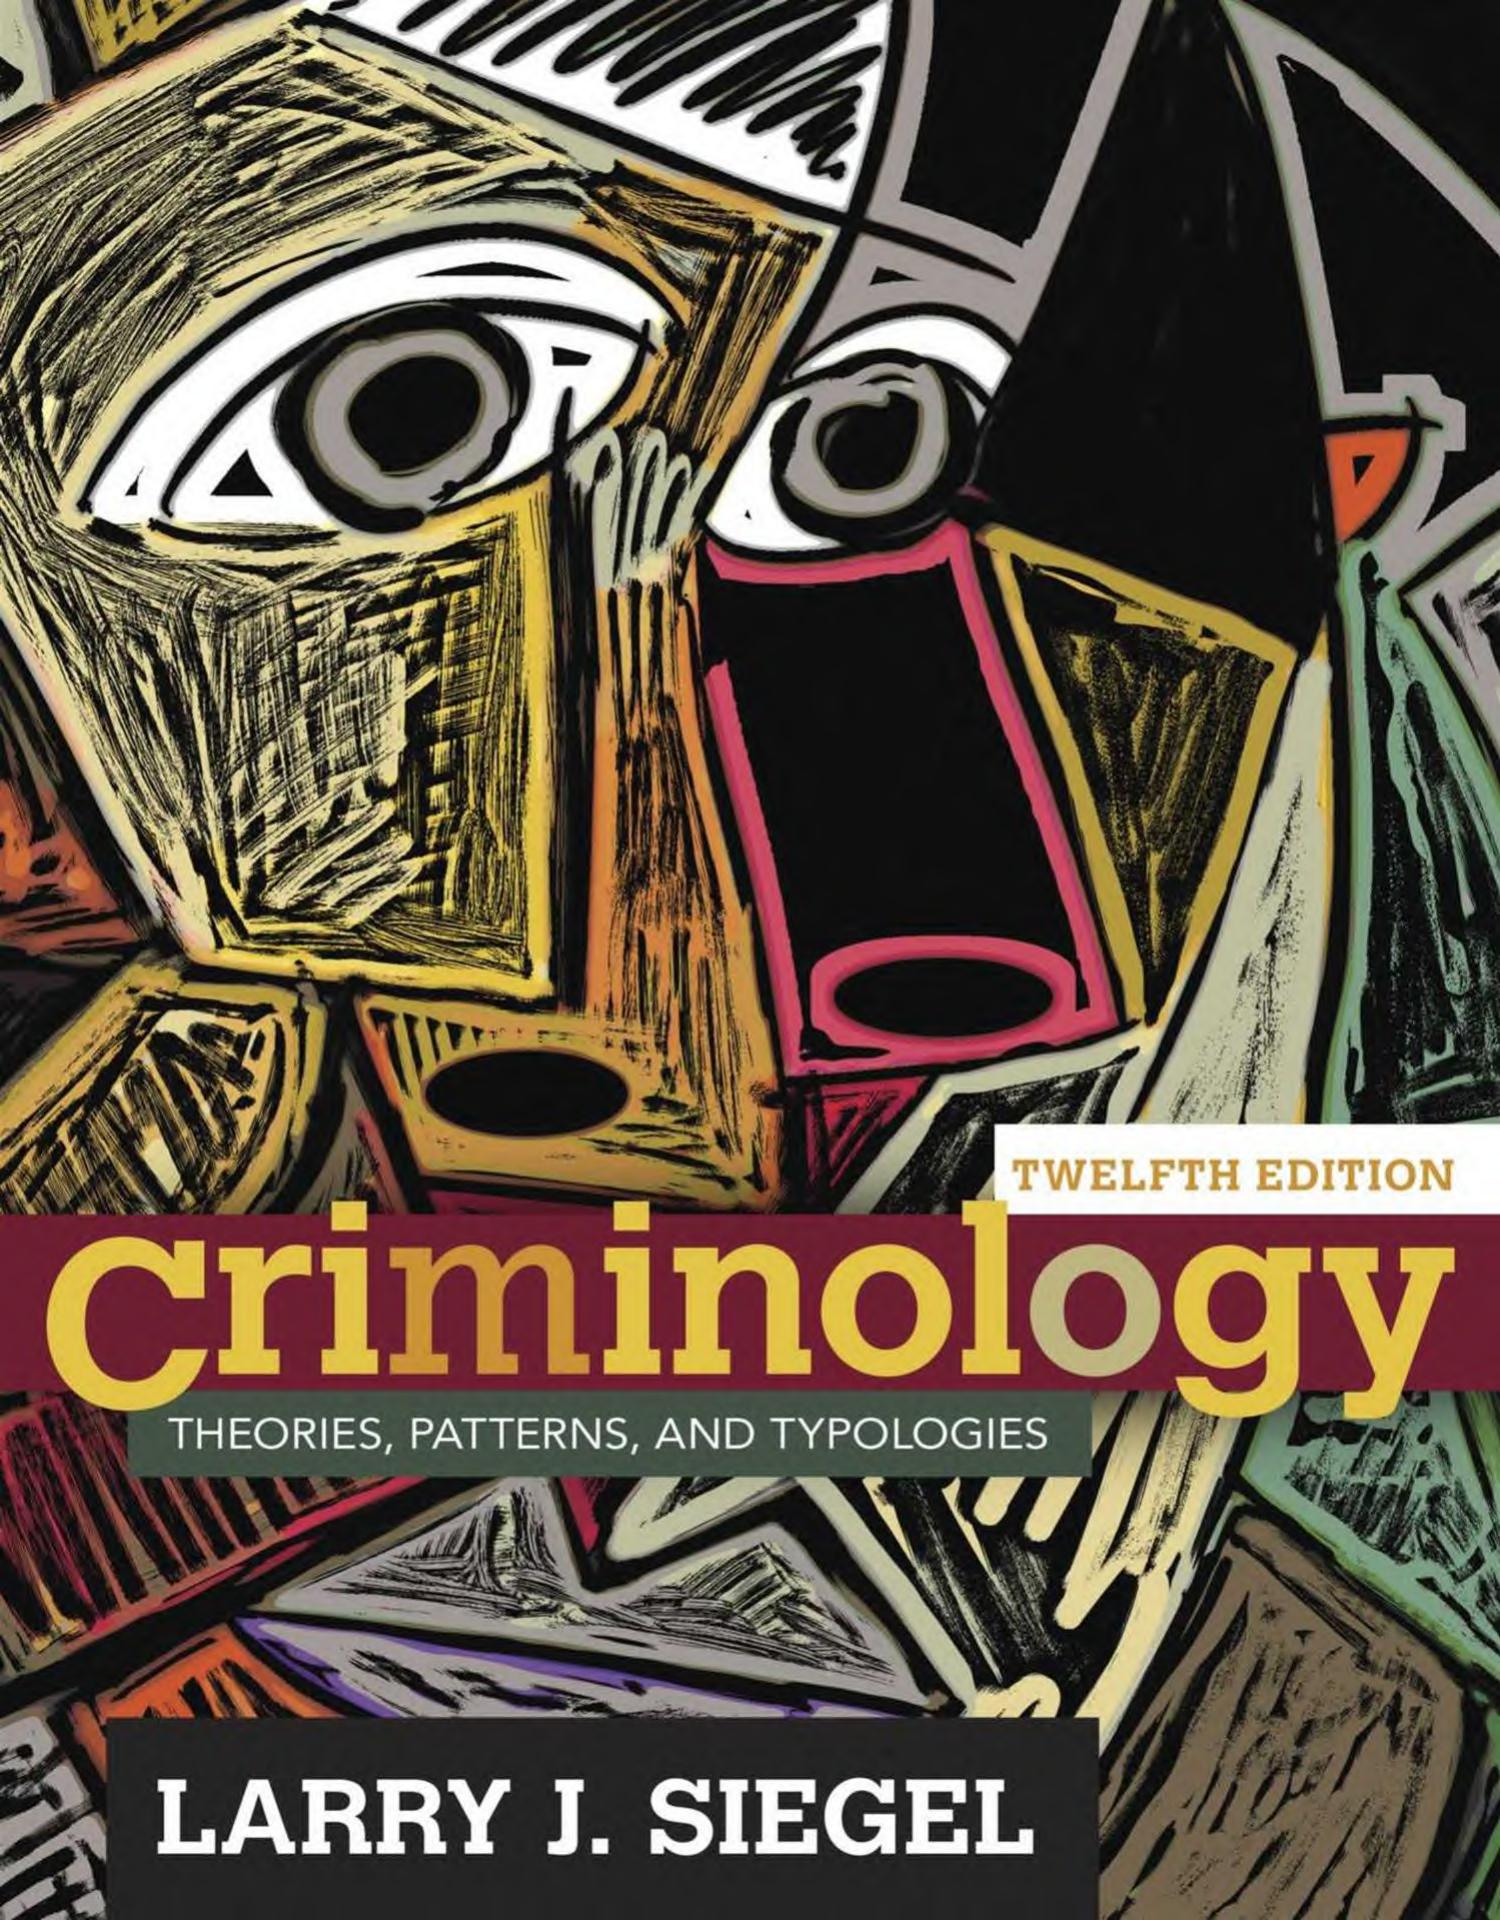 Criminology  Theories, Patterns, and Typologies 2014